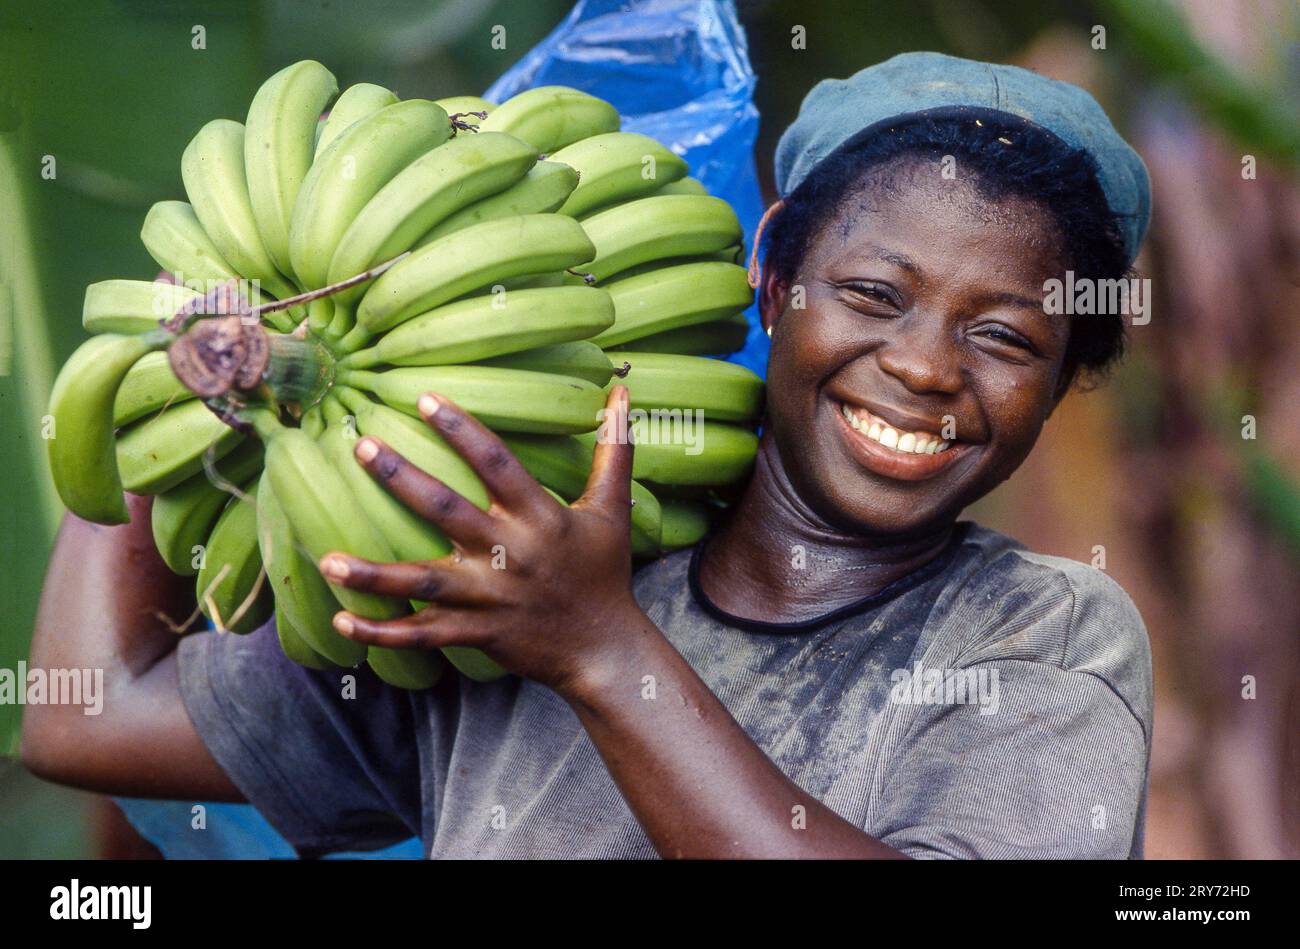 Ghana, Volta-region - Woman has just harvested a bunch of bananas on the Fair Trade plantation of OKE -bananas for export to Europe. Stock Photo